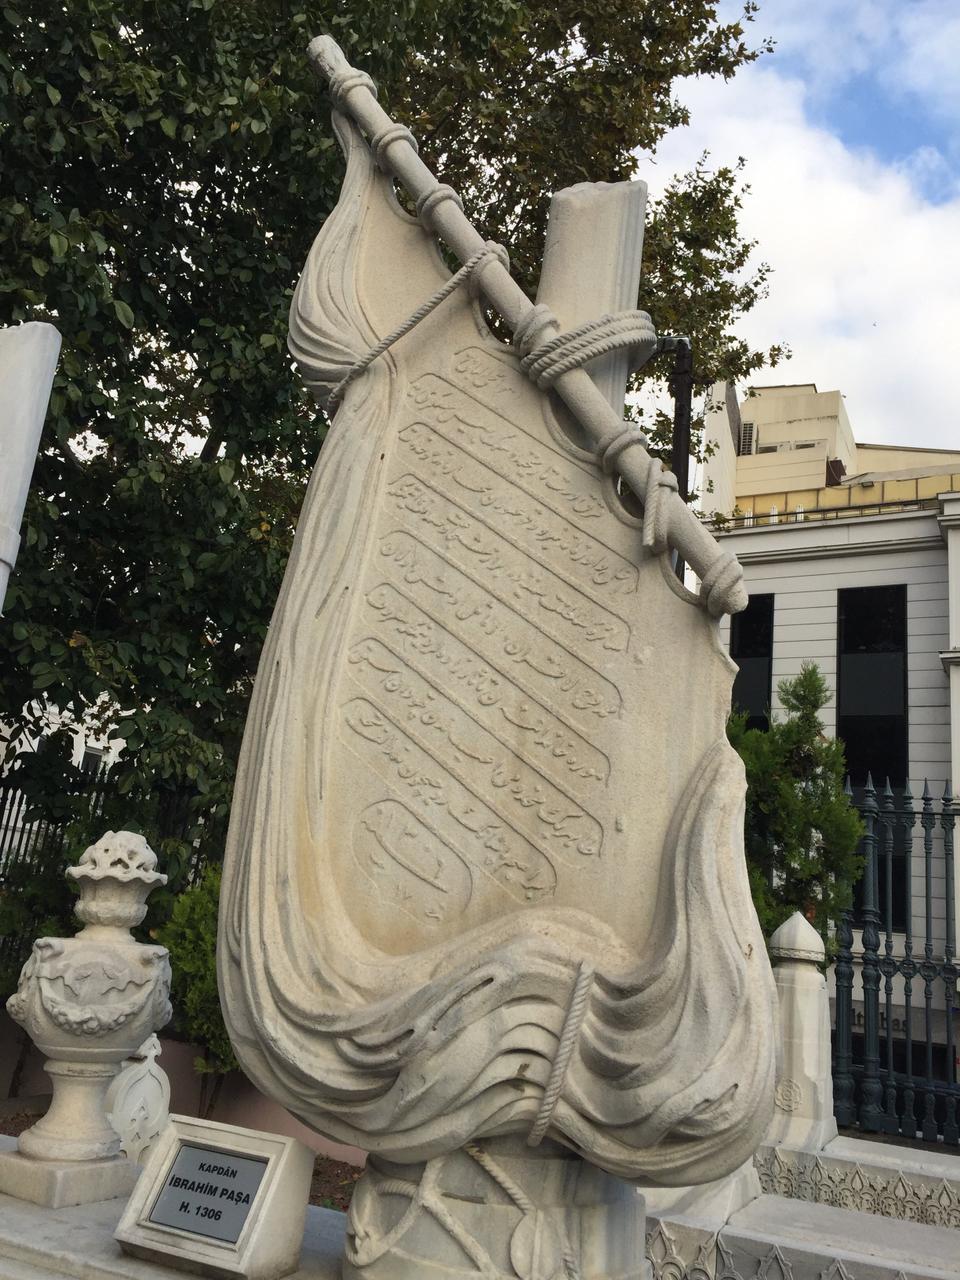 The gravestone of Captain Ibrahim Pasha. Who died in 1711. His tomb is at the graveyard of the mosque in Istanbul named after him, at the Ibrahim Pasha Complex.